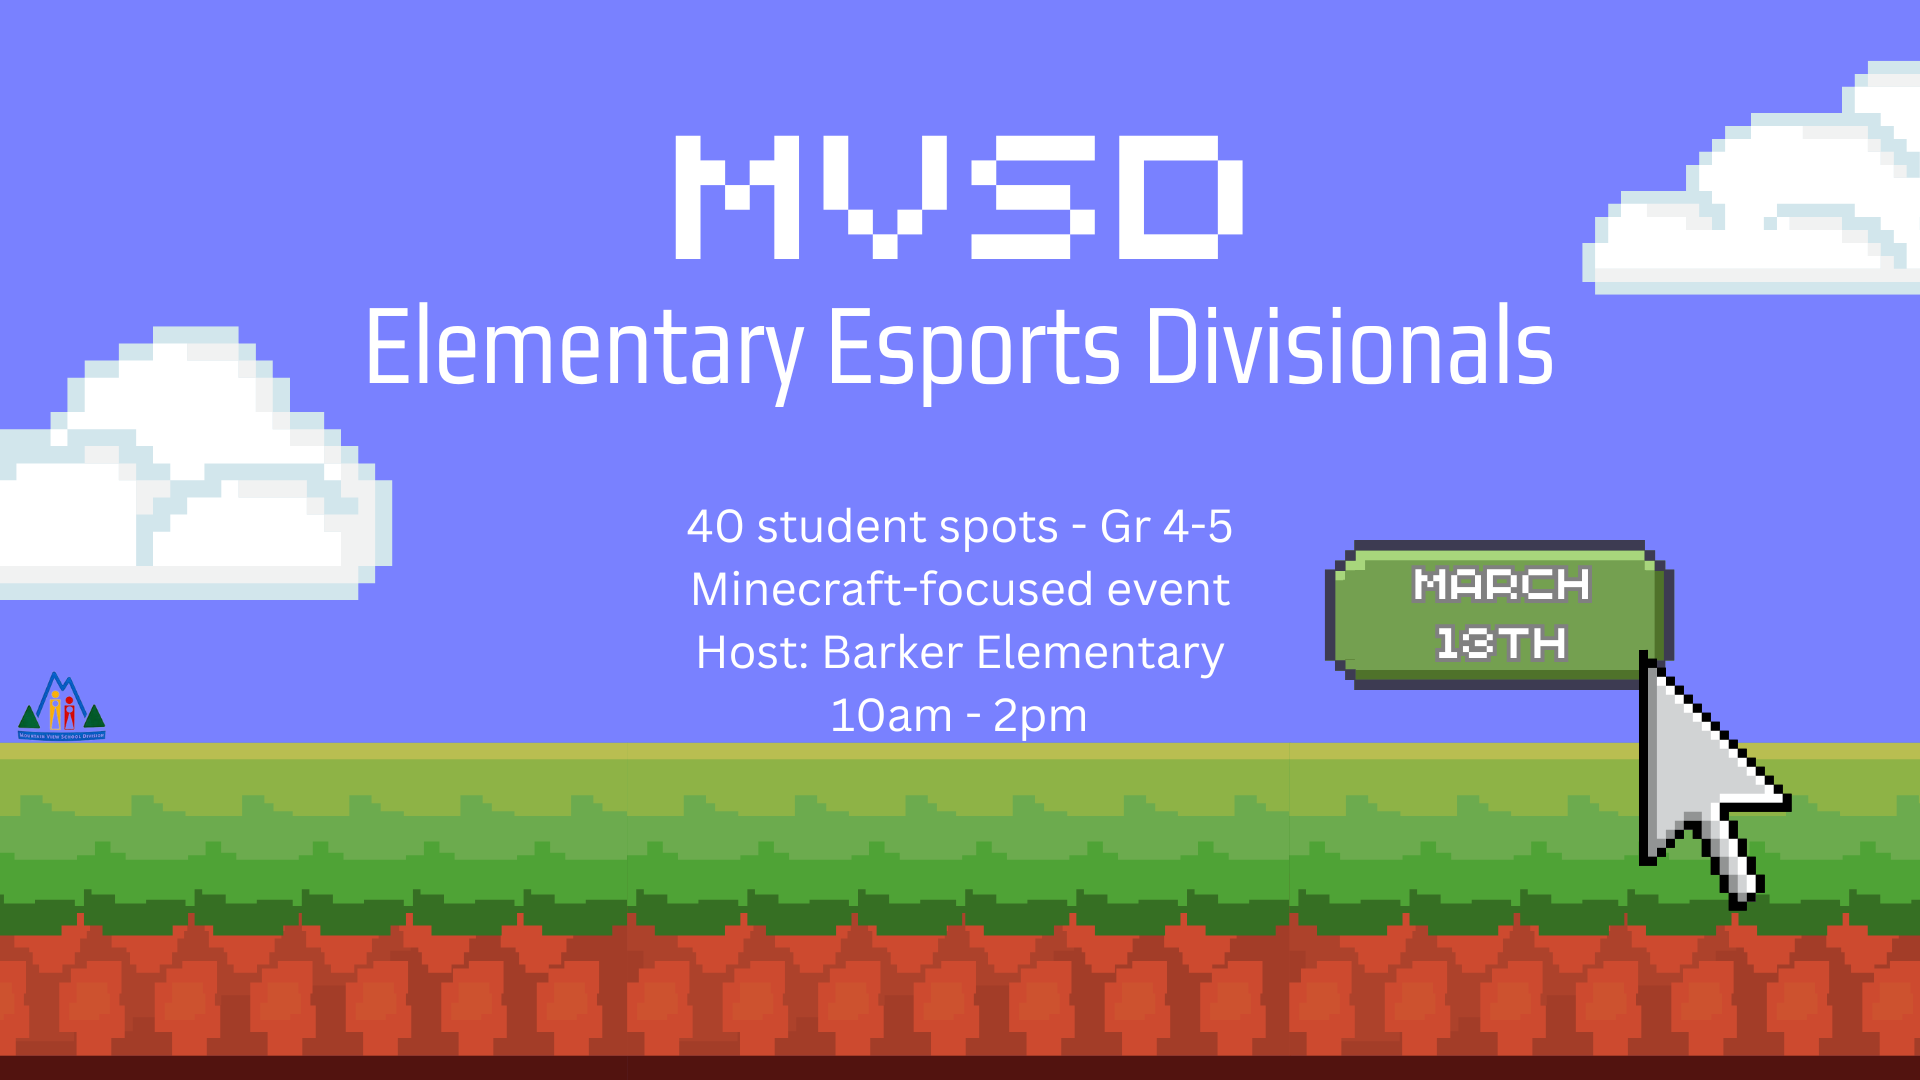 Elementary Esports Divisionals – Planning Time!